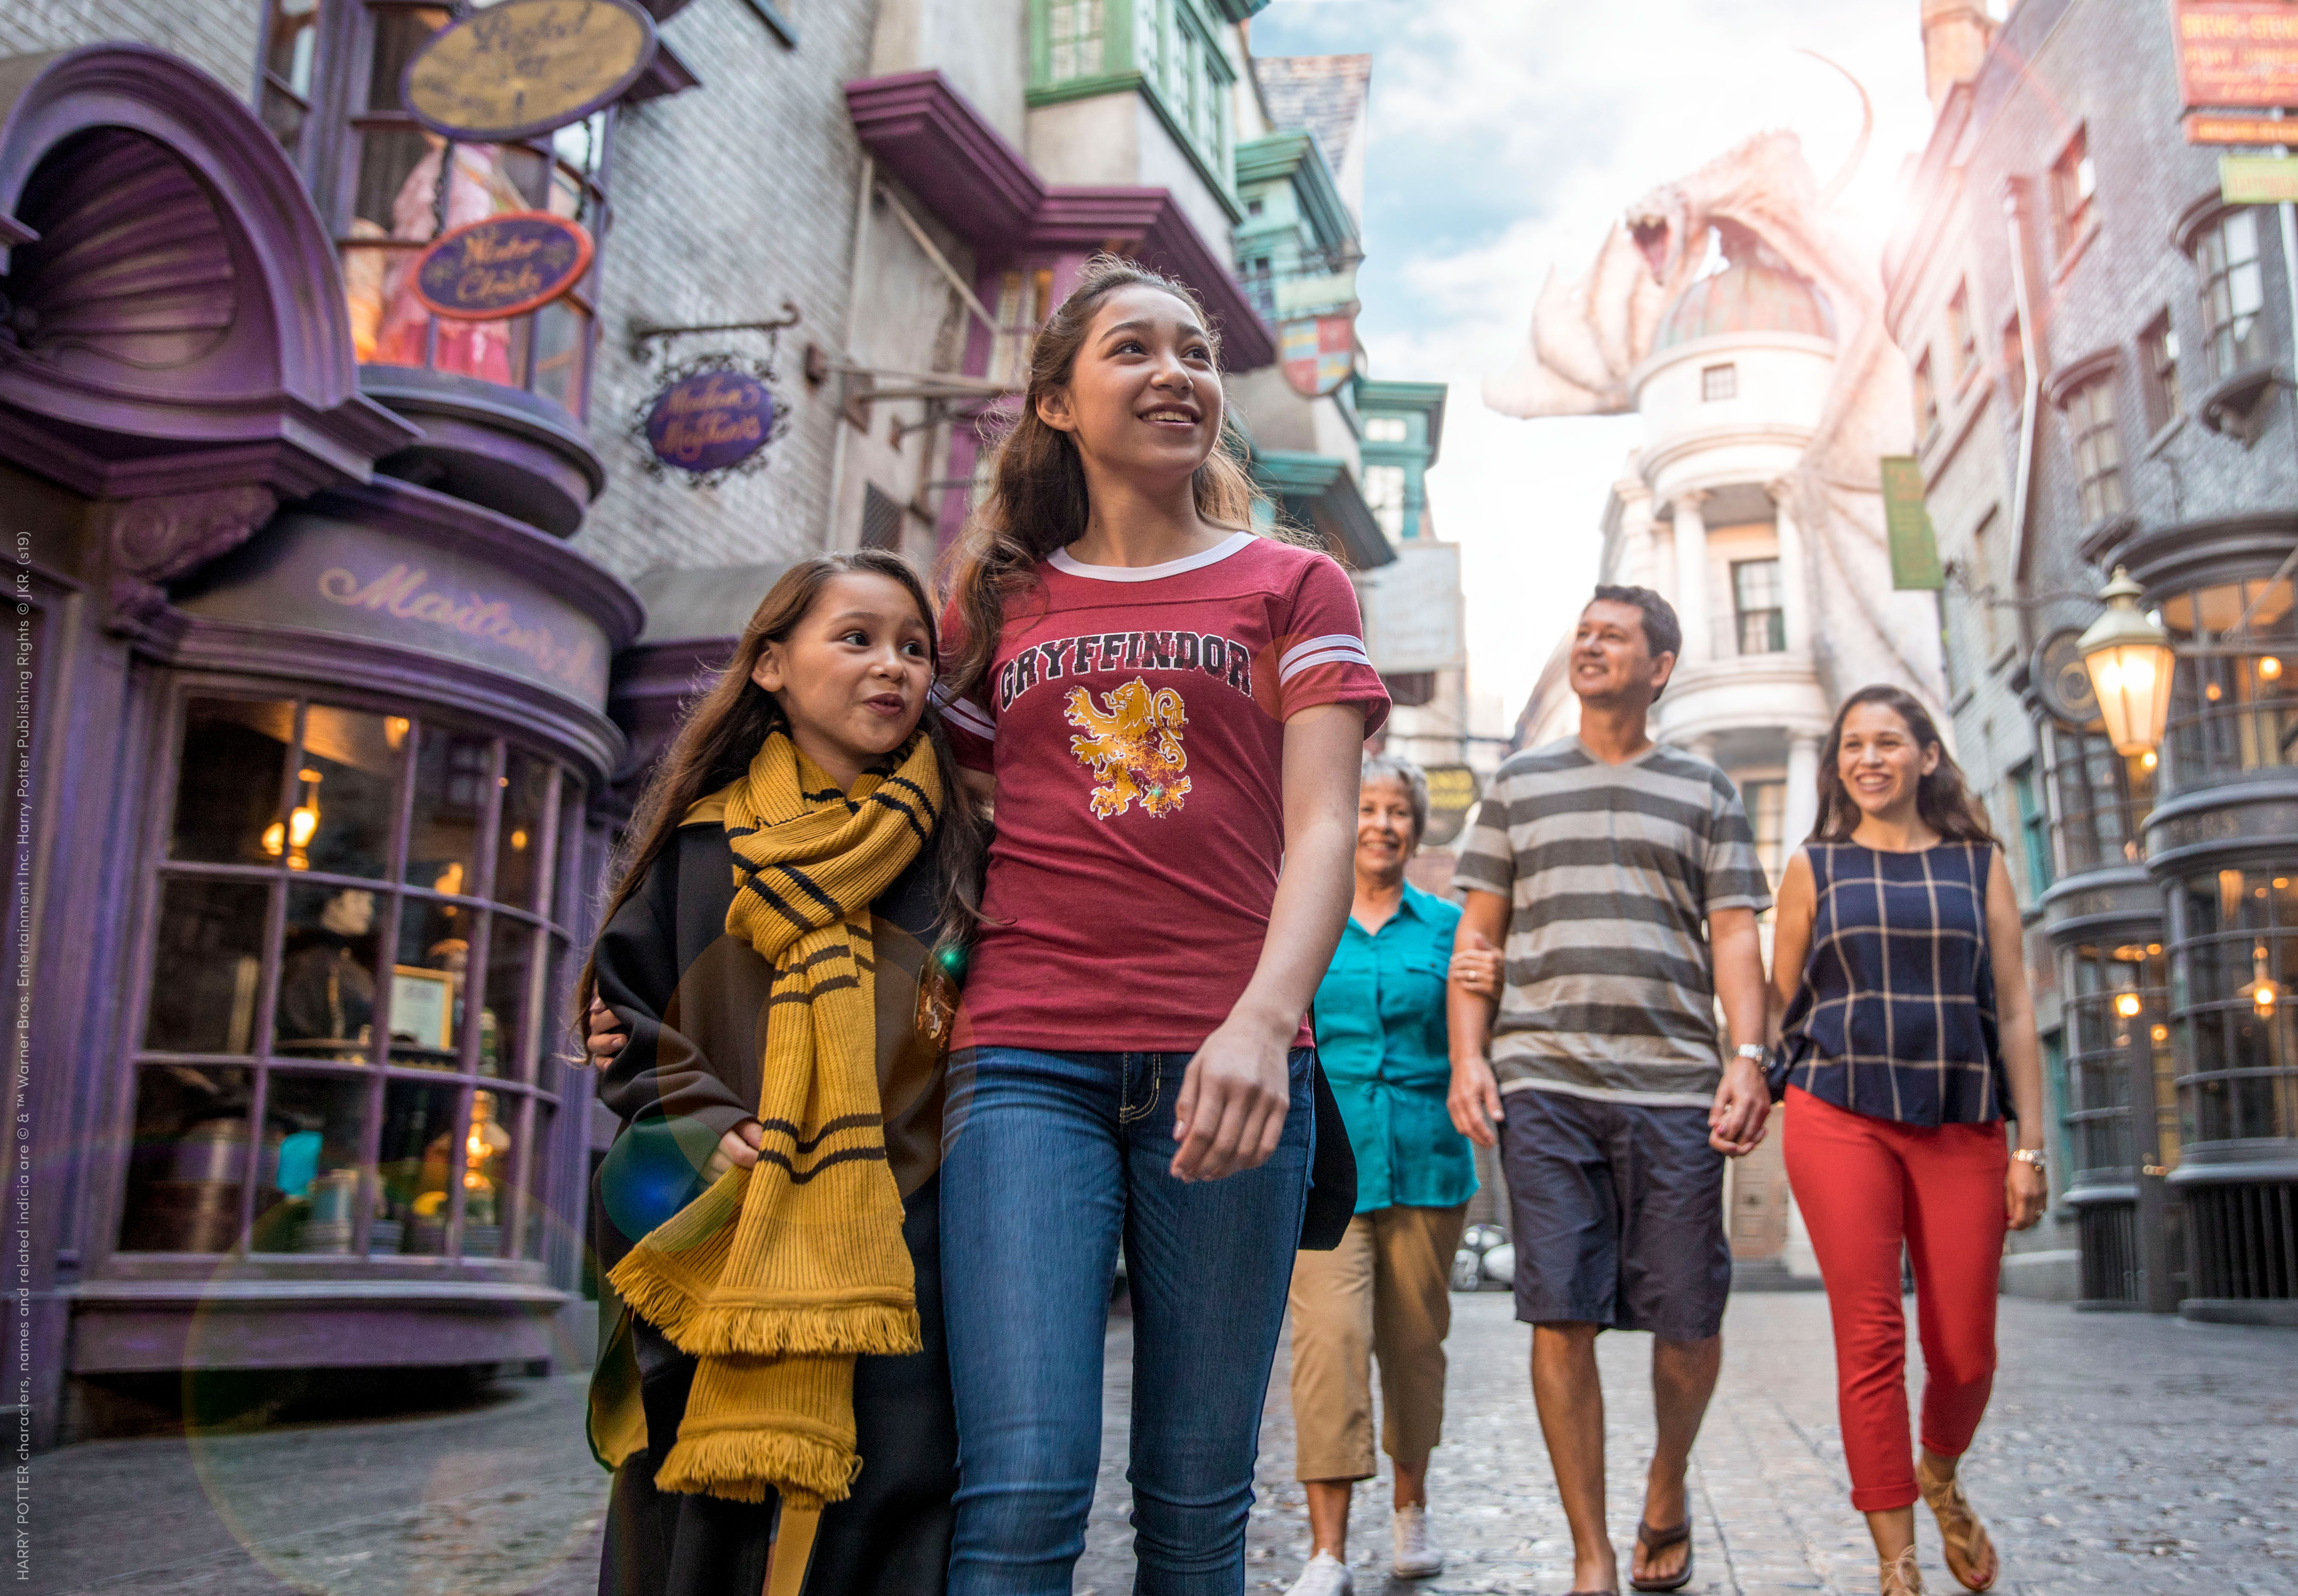 Members will have access to discounts at the Wizarding World of Harry Potter theme park.